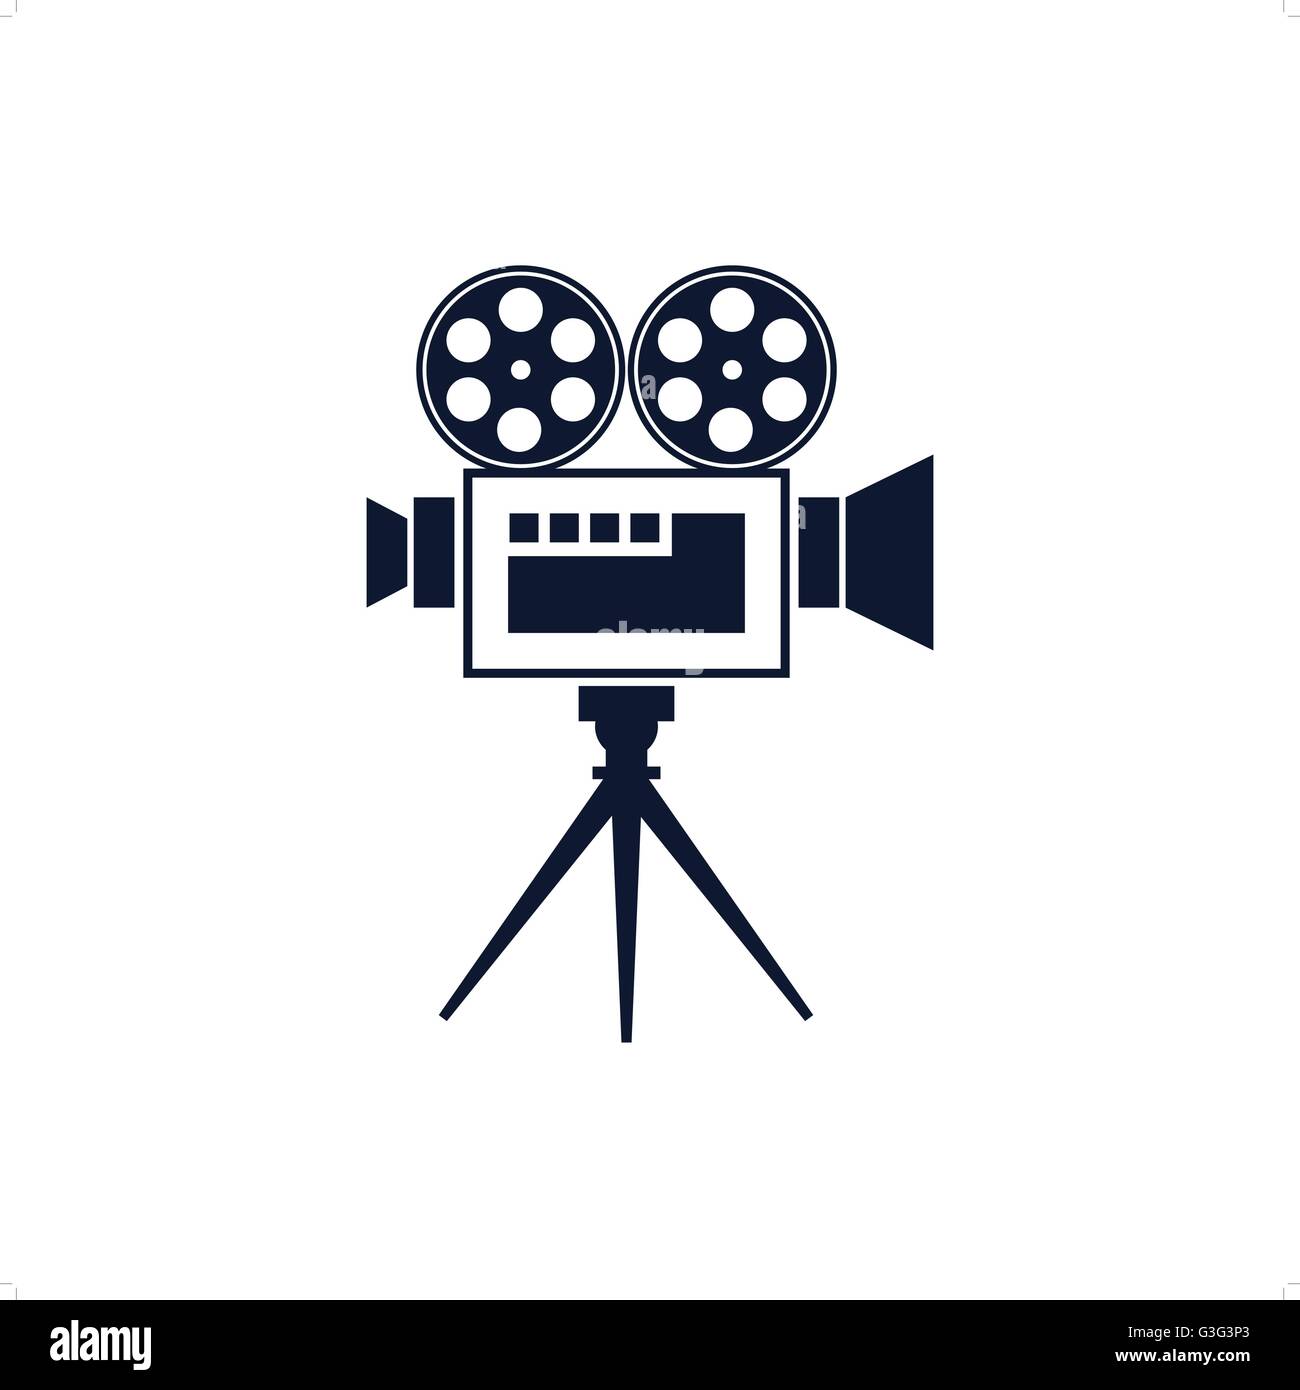 Movie projector Cut Out Stock Images & Pictures - Alamy